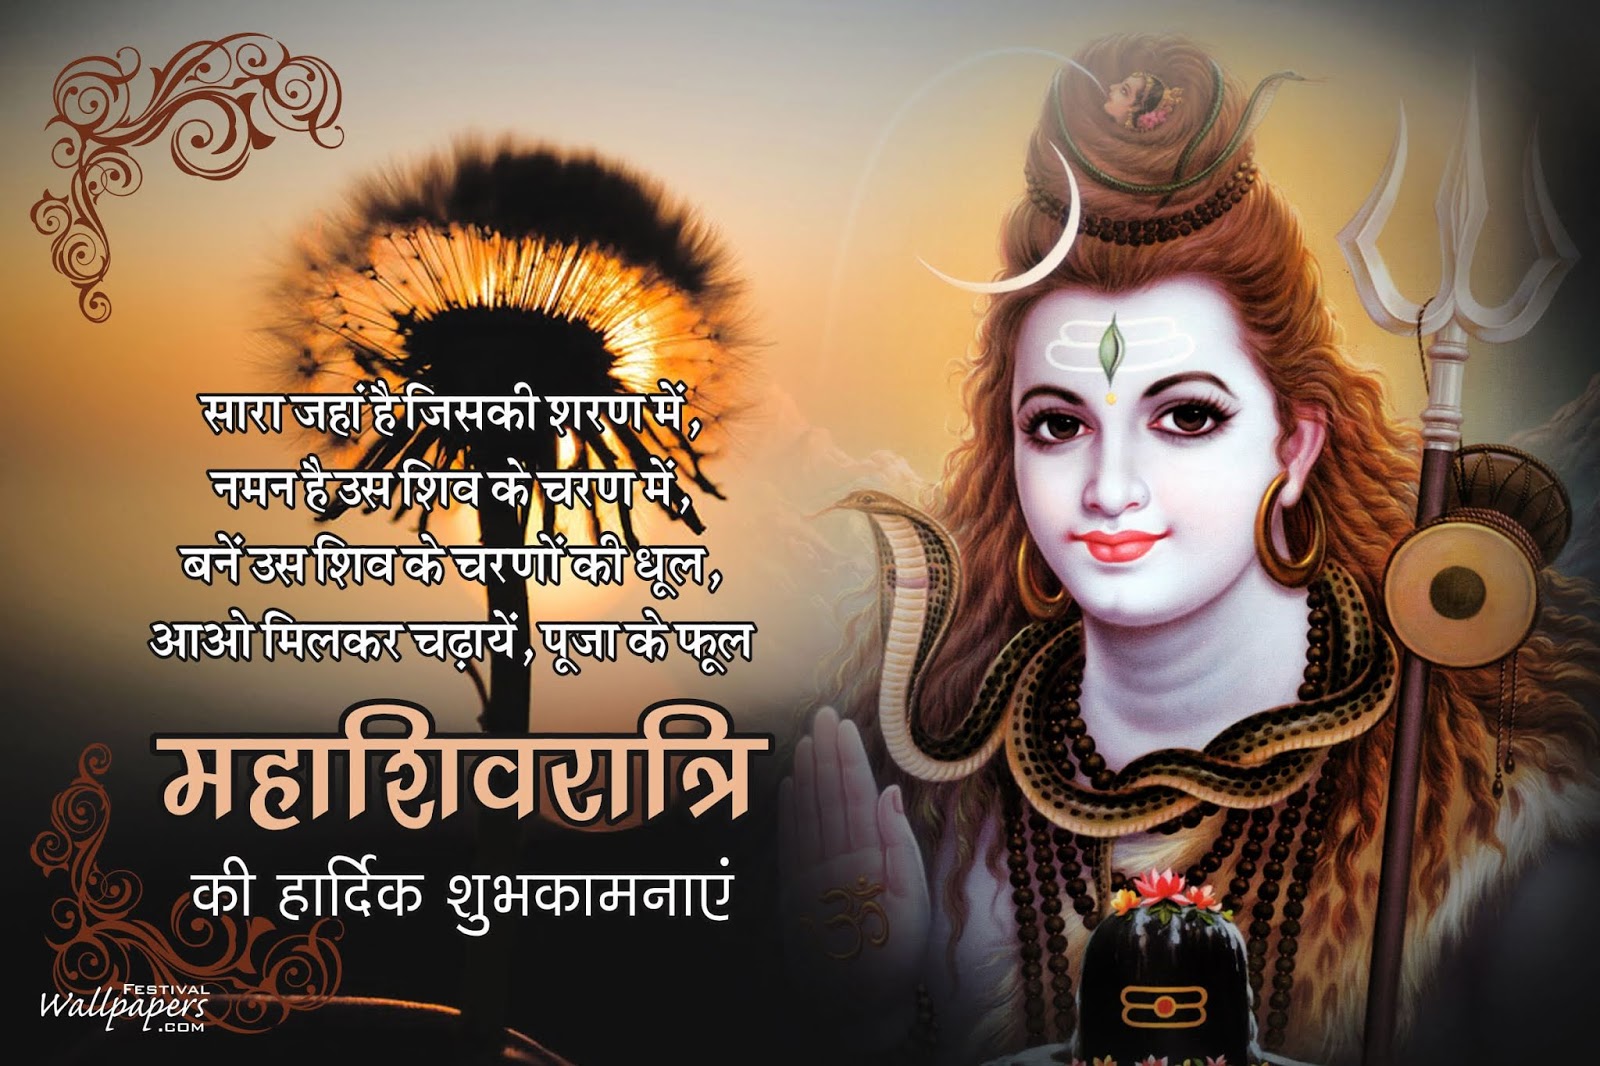 Best Maha Shivratri Wishes Image And Wallpaper